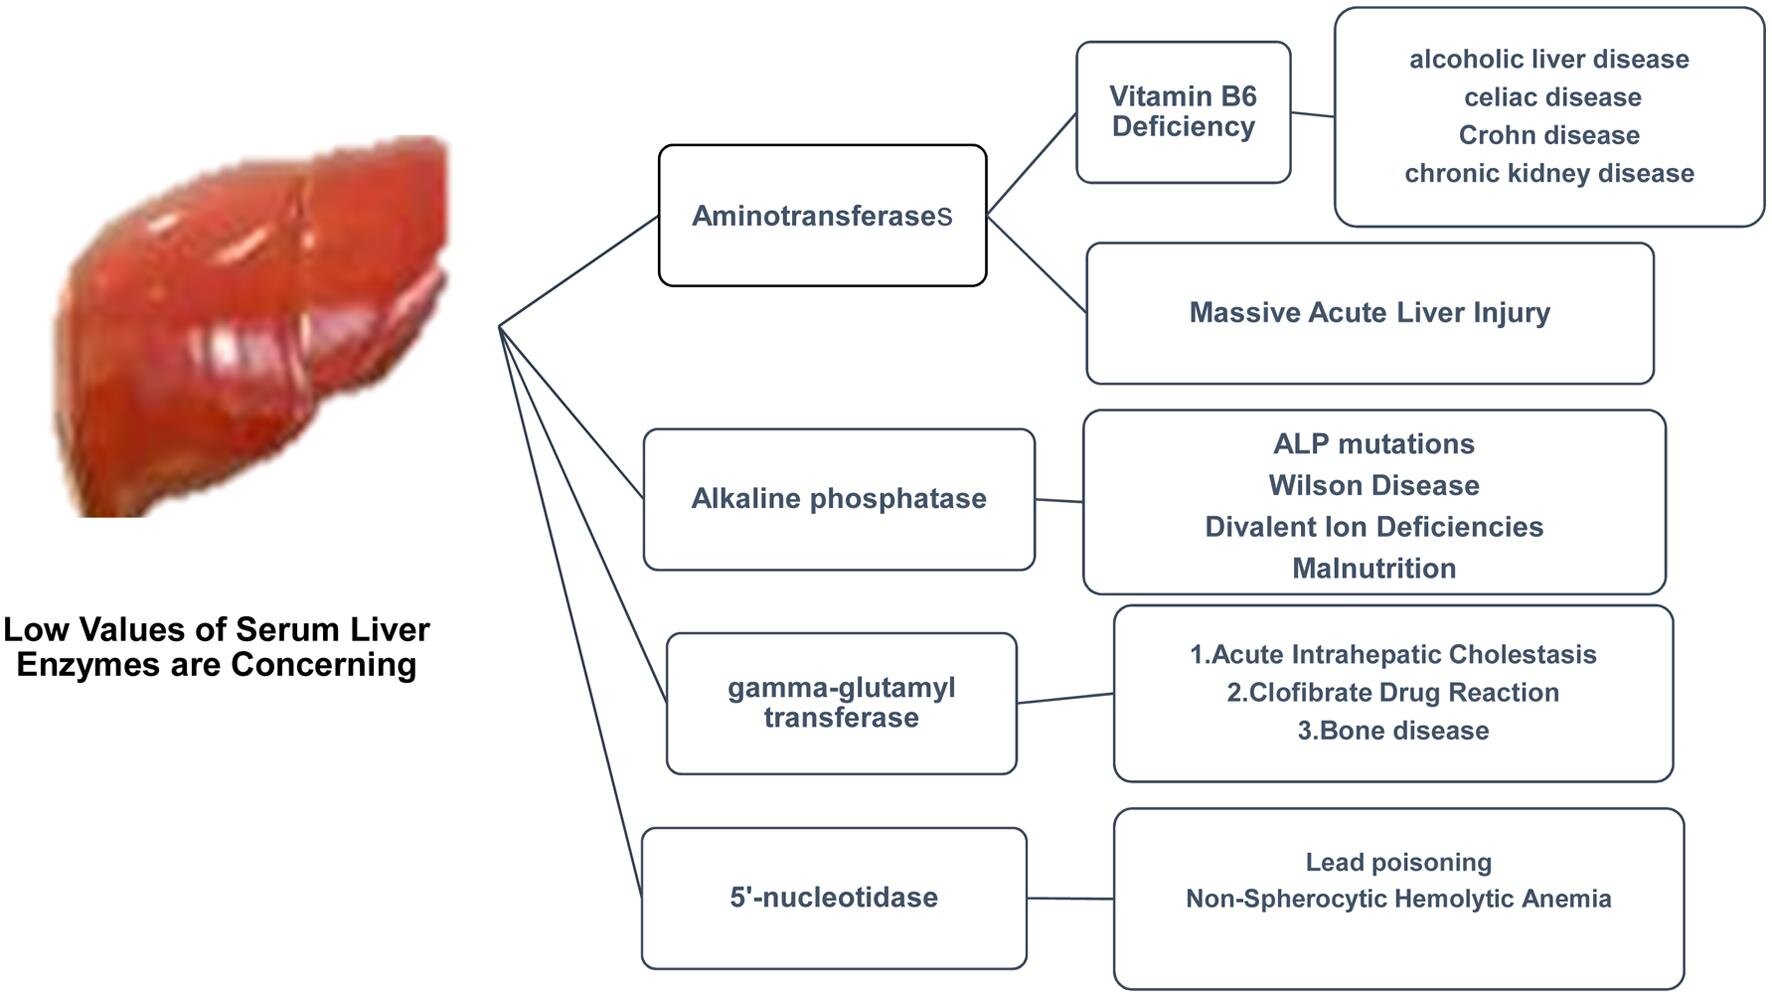 Review focuses on diseases associated with subnormal serum liver enzyme levels